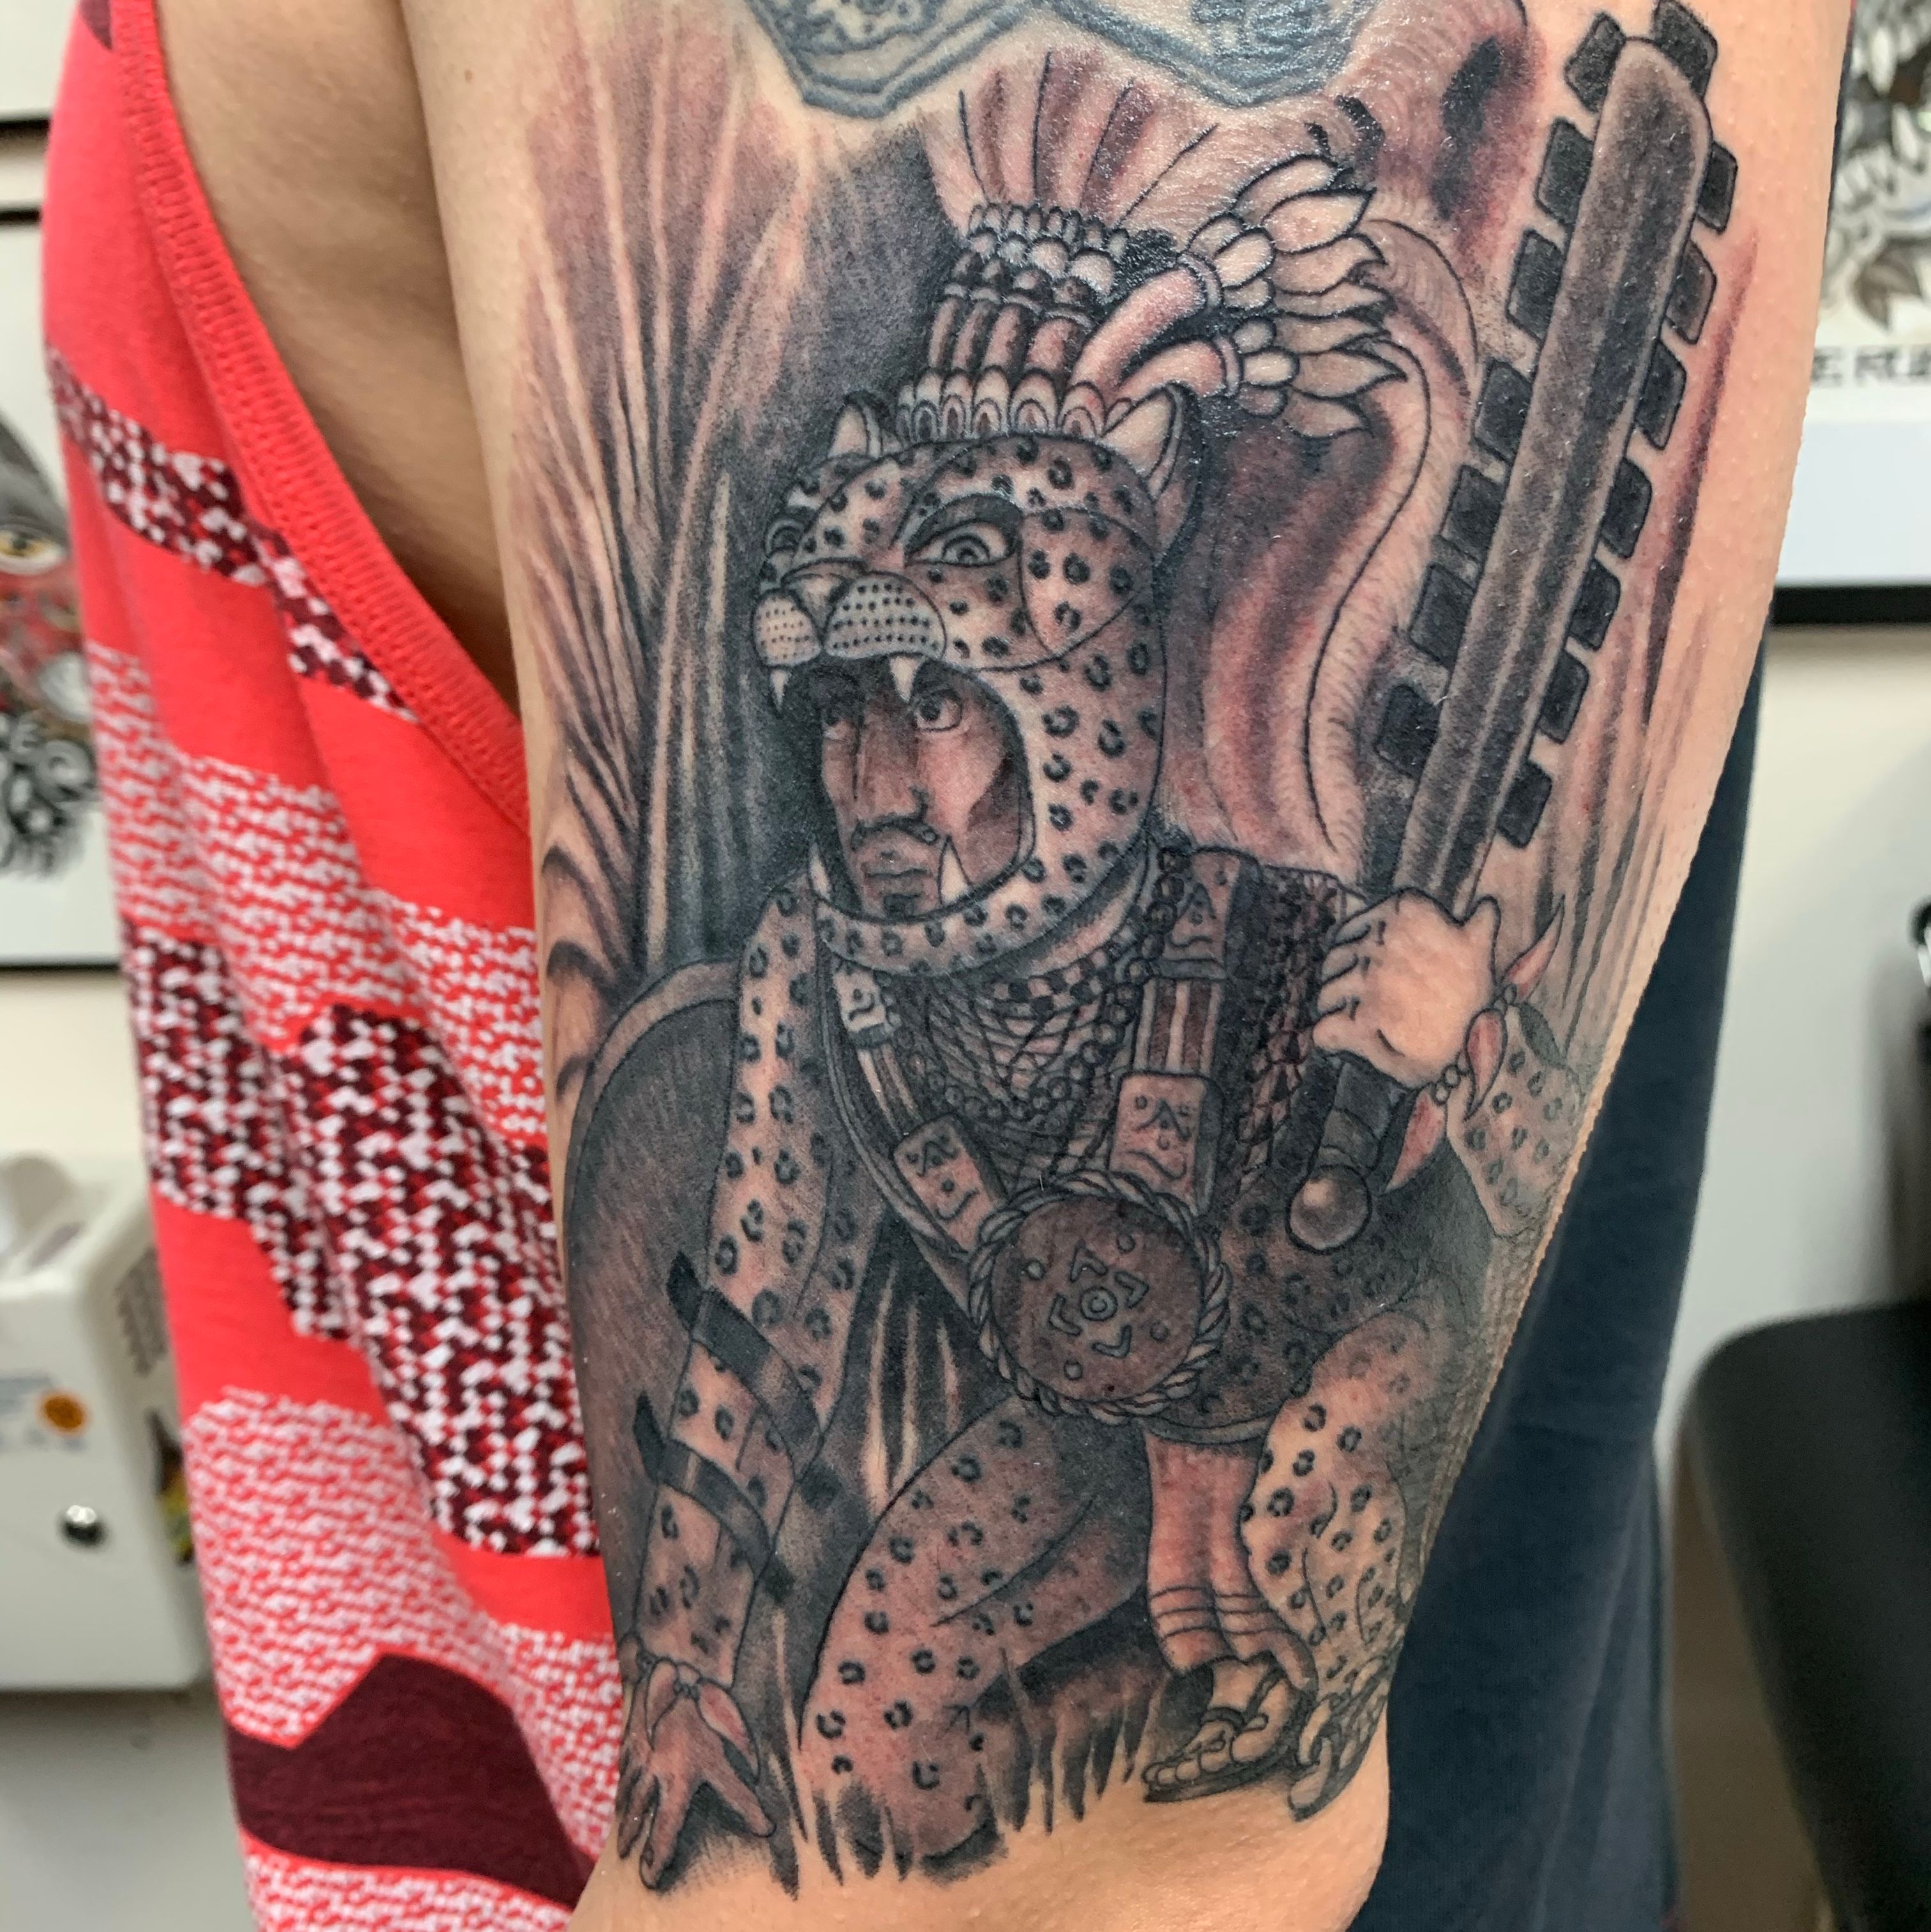 120 Warrior Tattoo Ideas To Bring Out The Soldier In You